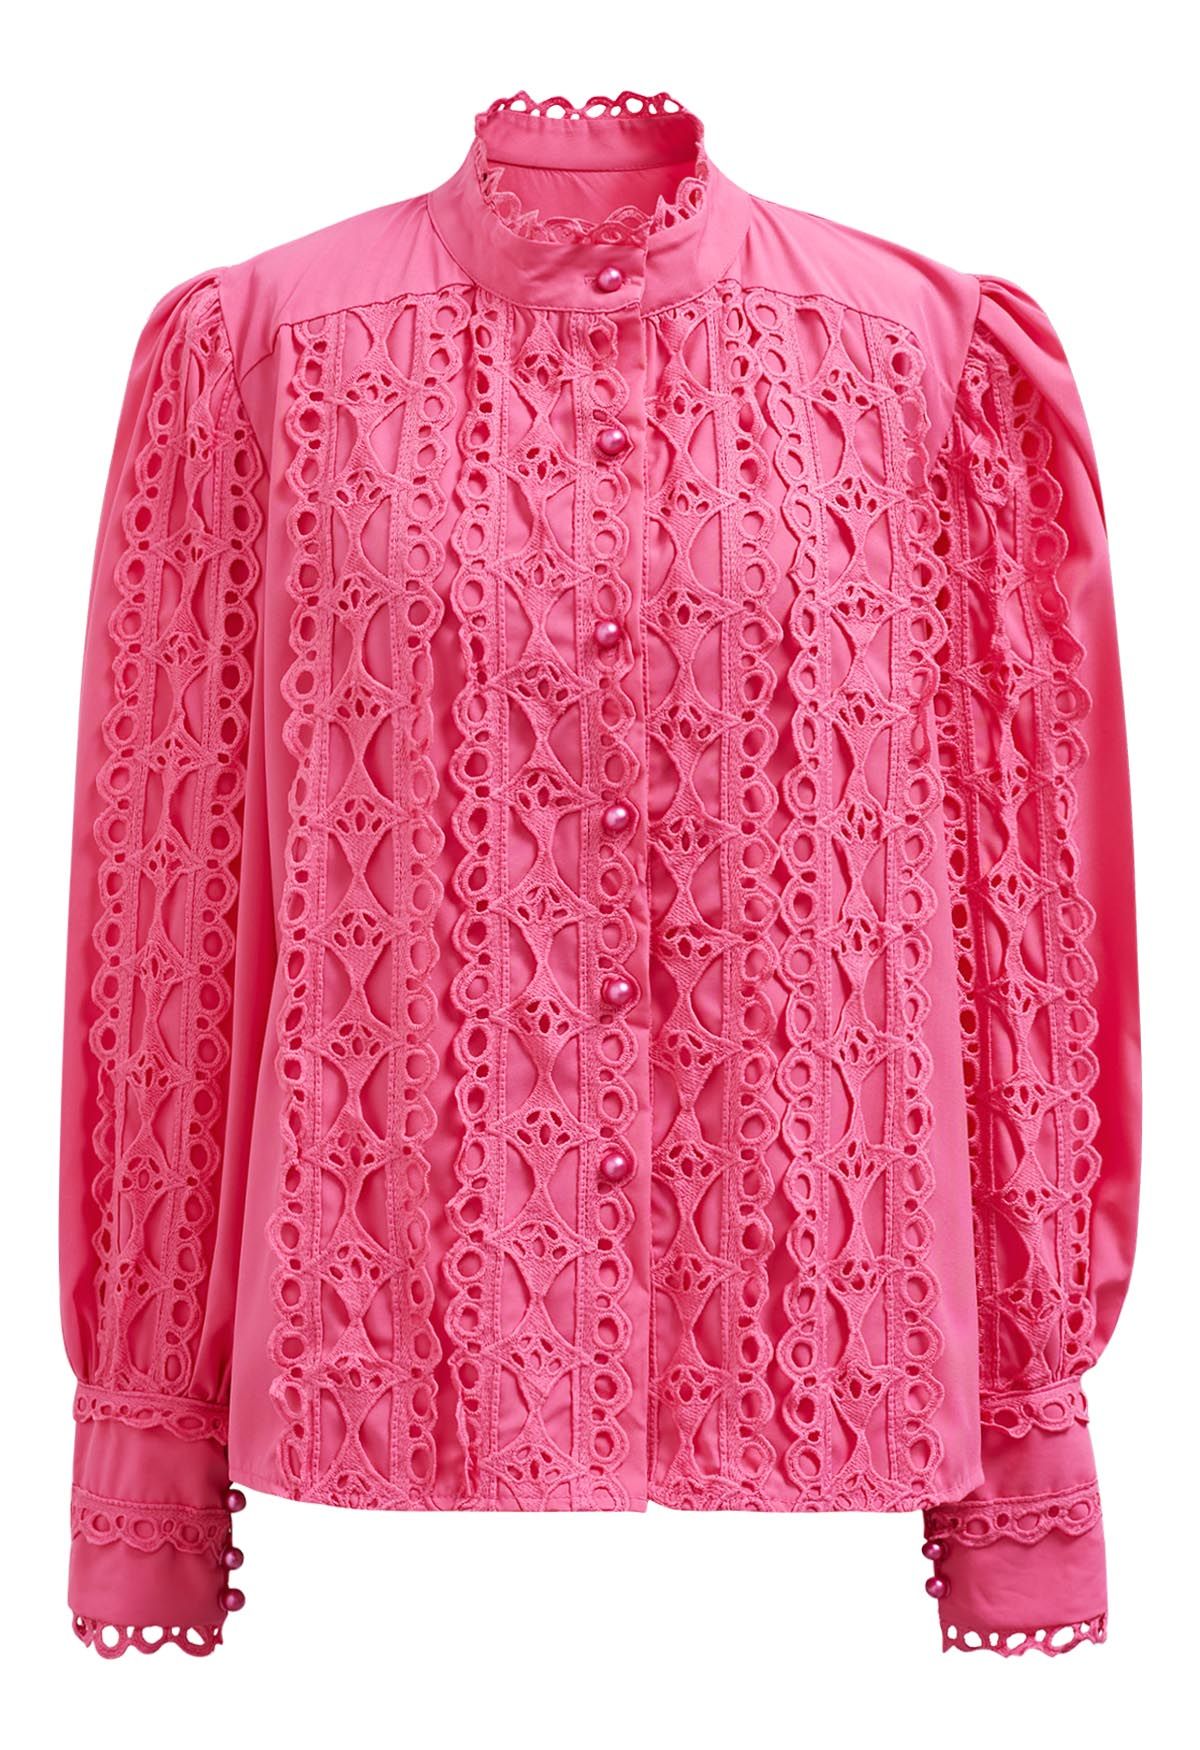 Exquisite Cutwork Bubble Sleeves Button-Up Shirt in Hot Pink - Retro ...